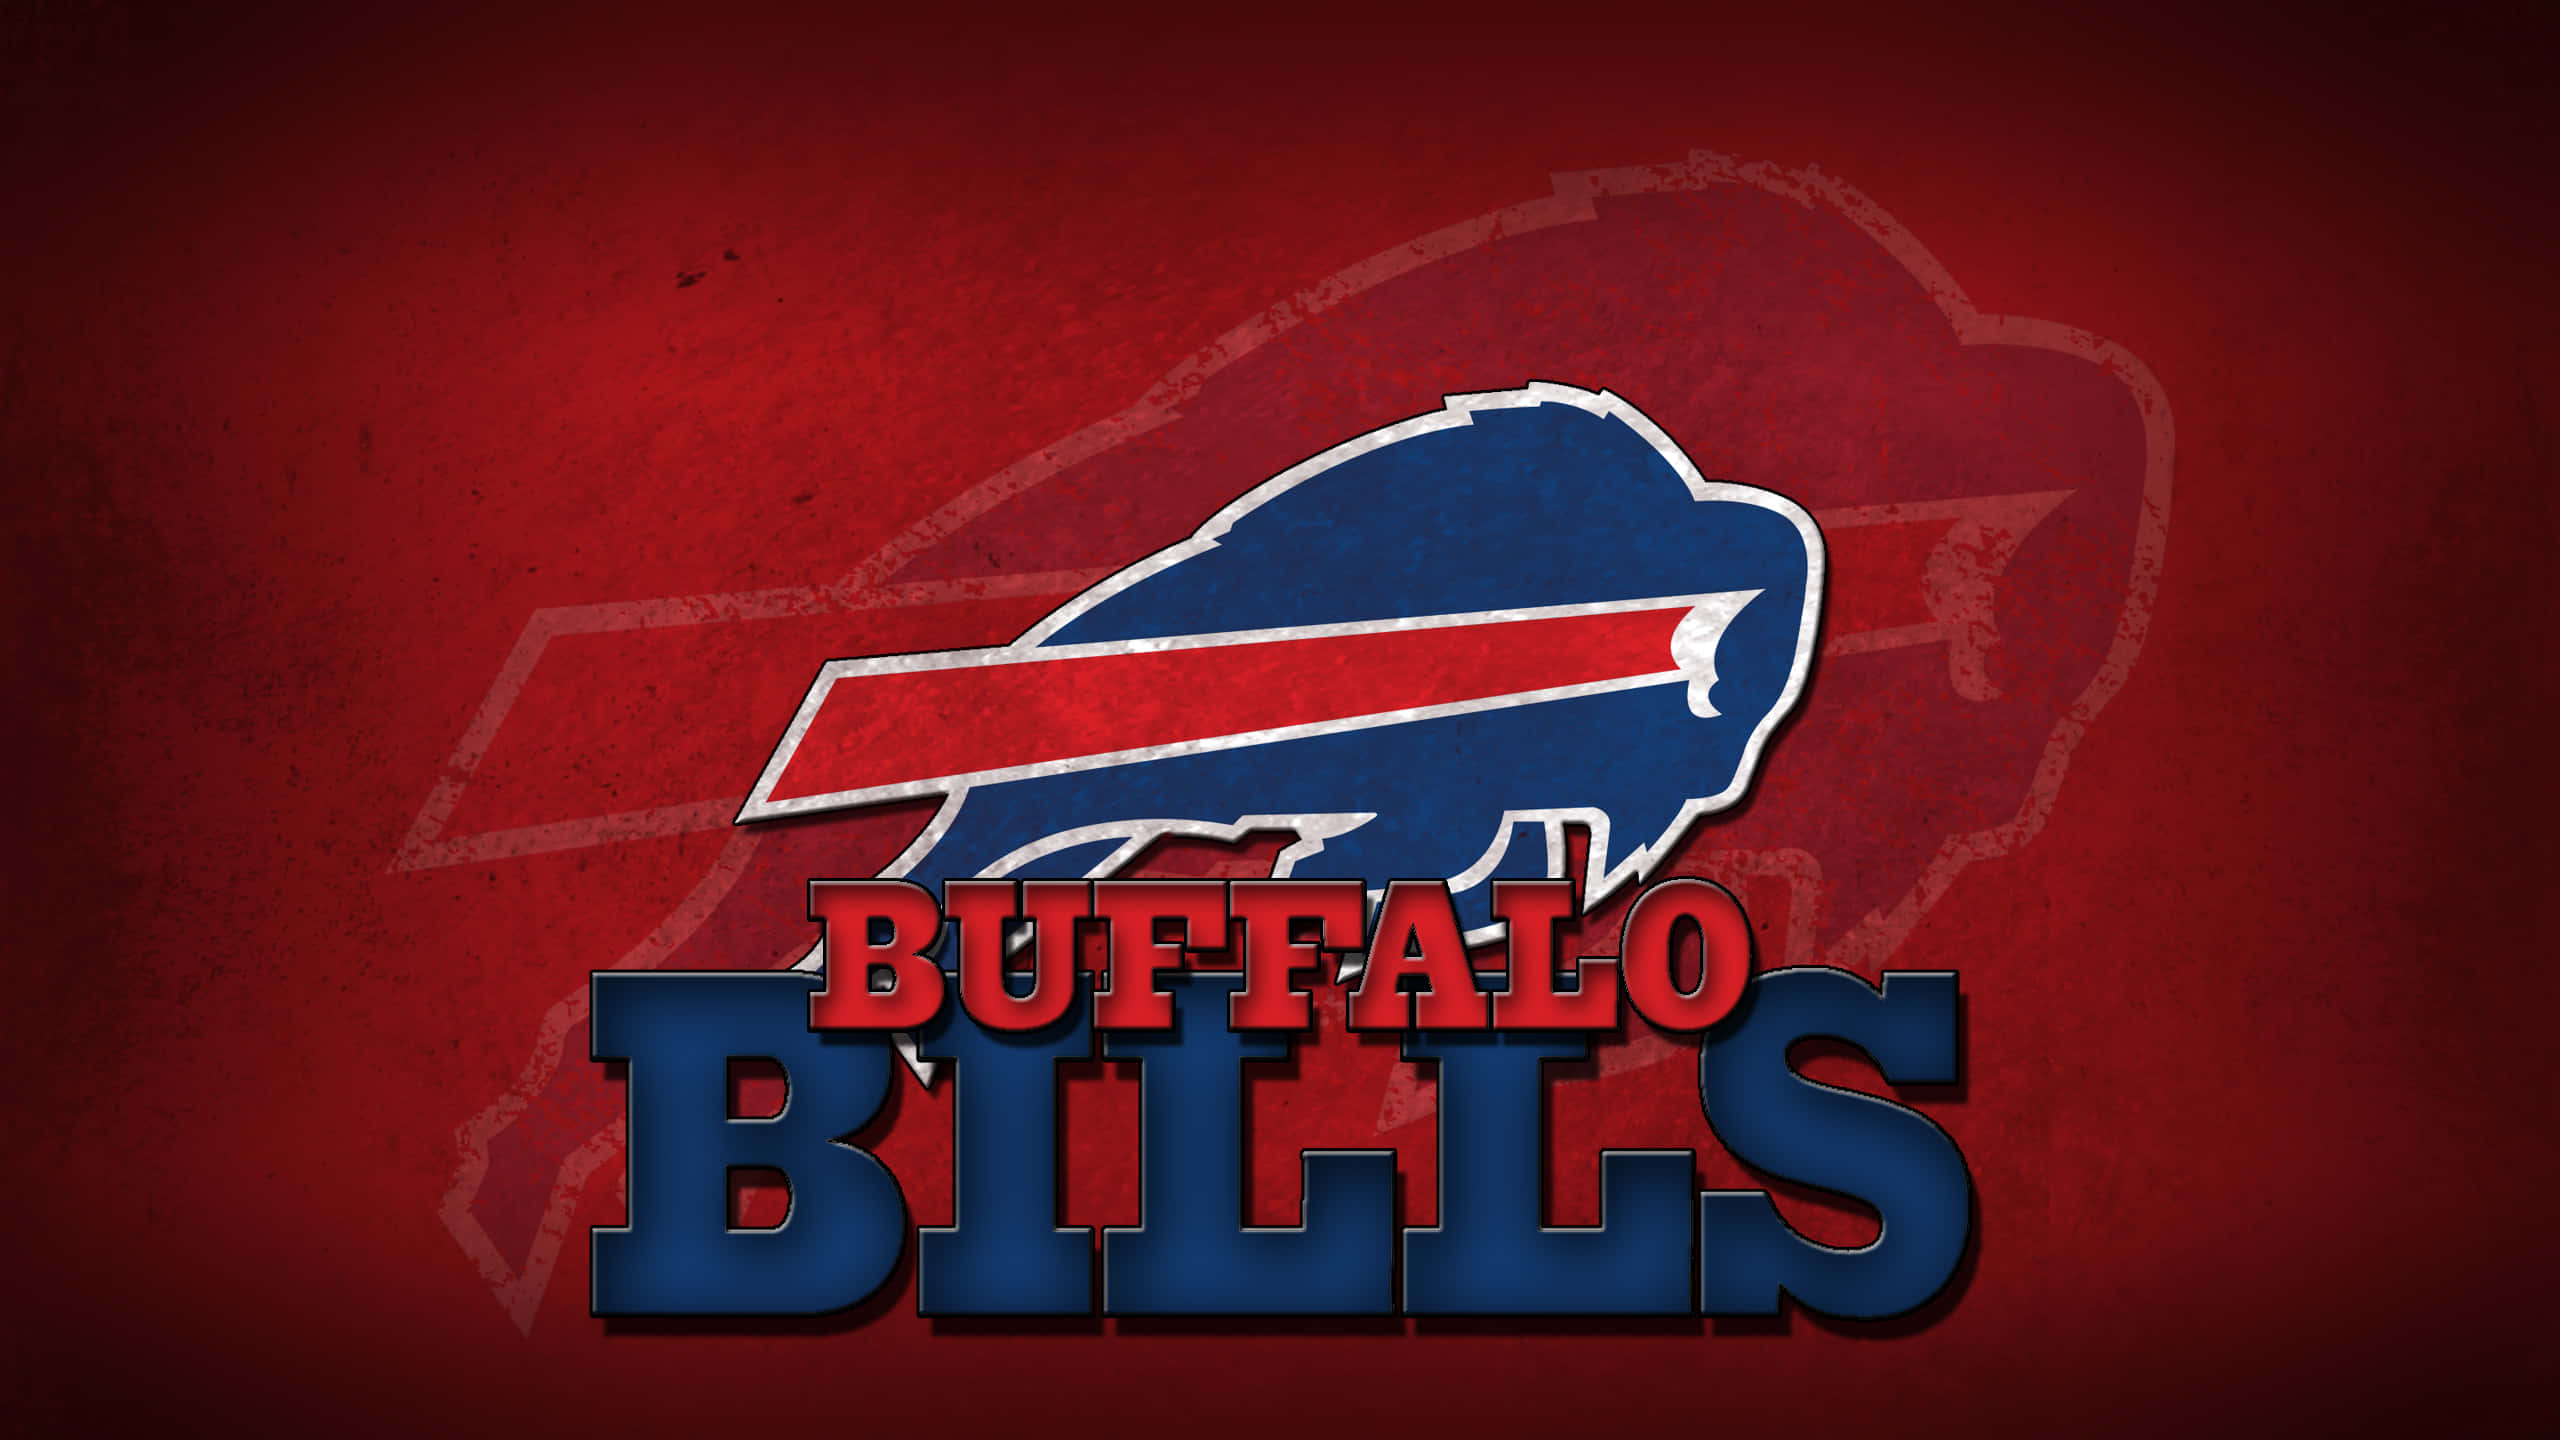 "The Buffalo Bills Look to Make Some Noise This Season"